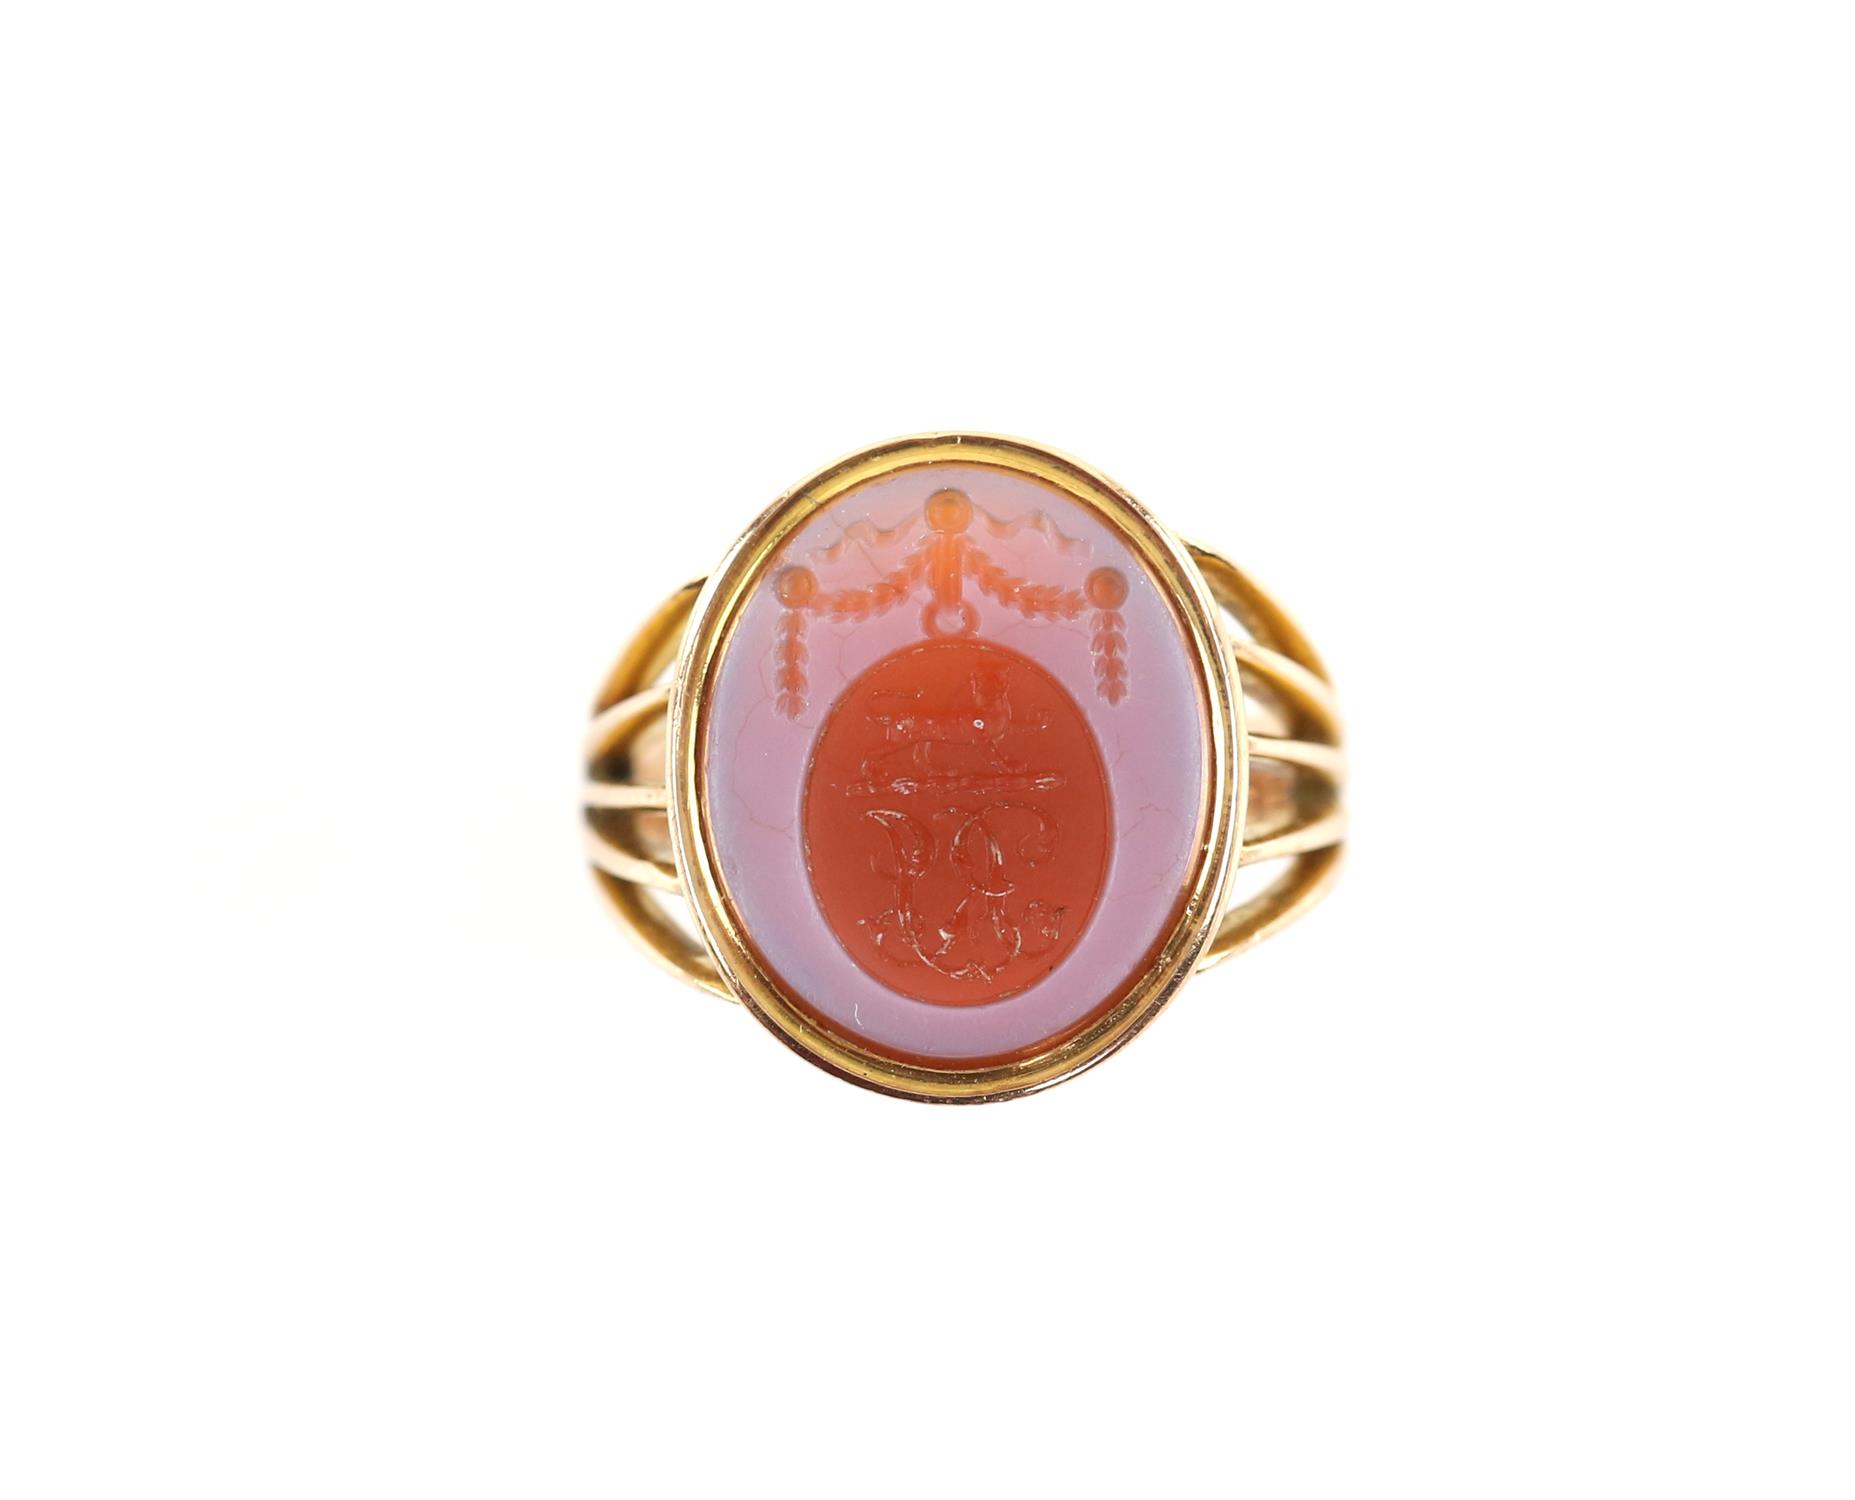 Victorian agate signet ring, with seal engraving, depicting a standing lion and scrolled initials